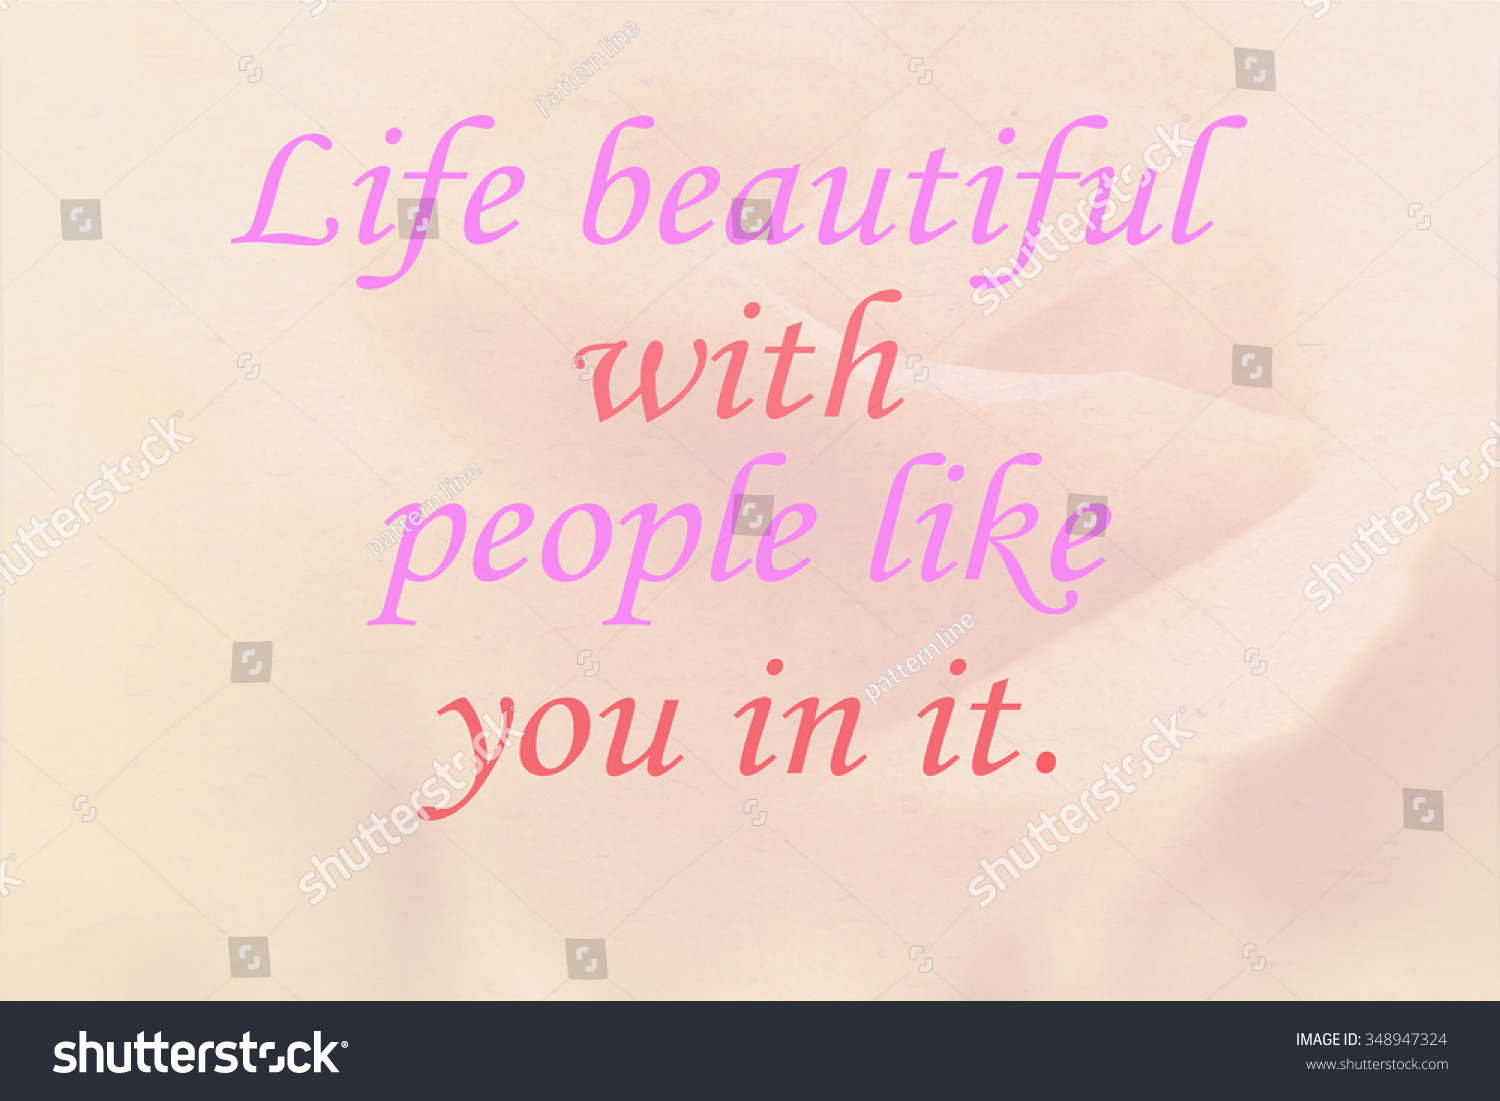 Inspirational Typographic Quote Life is beautiful with people like you in it